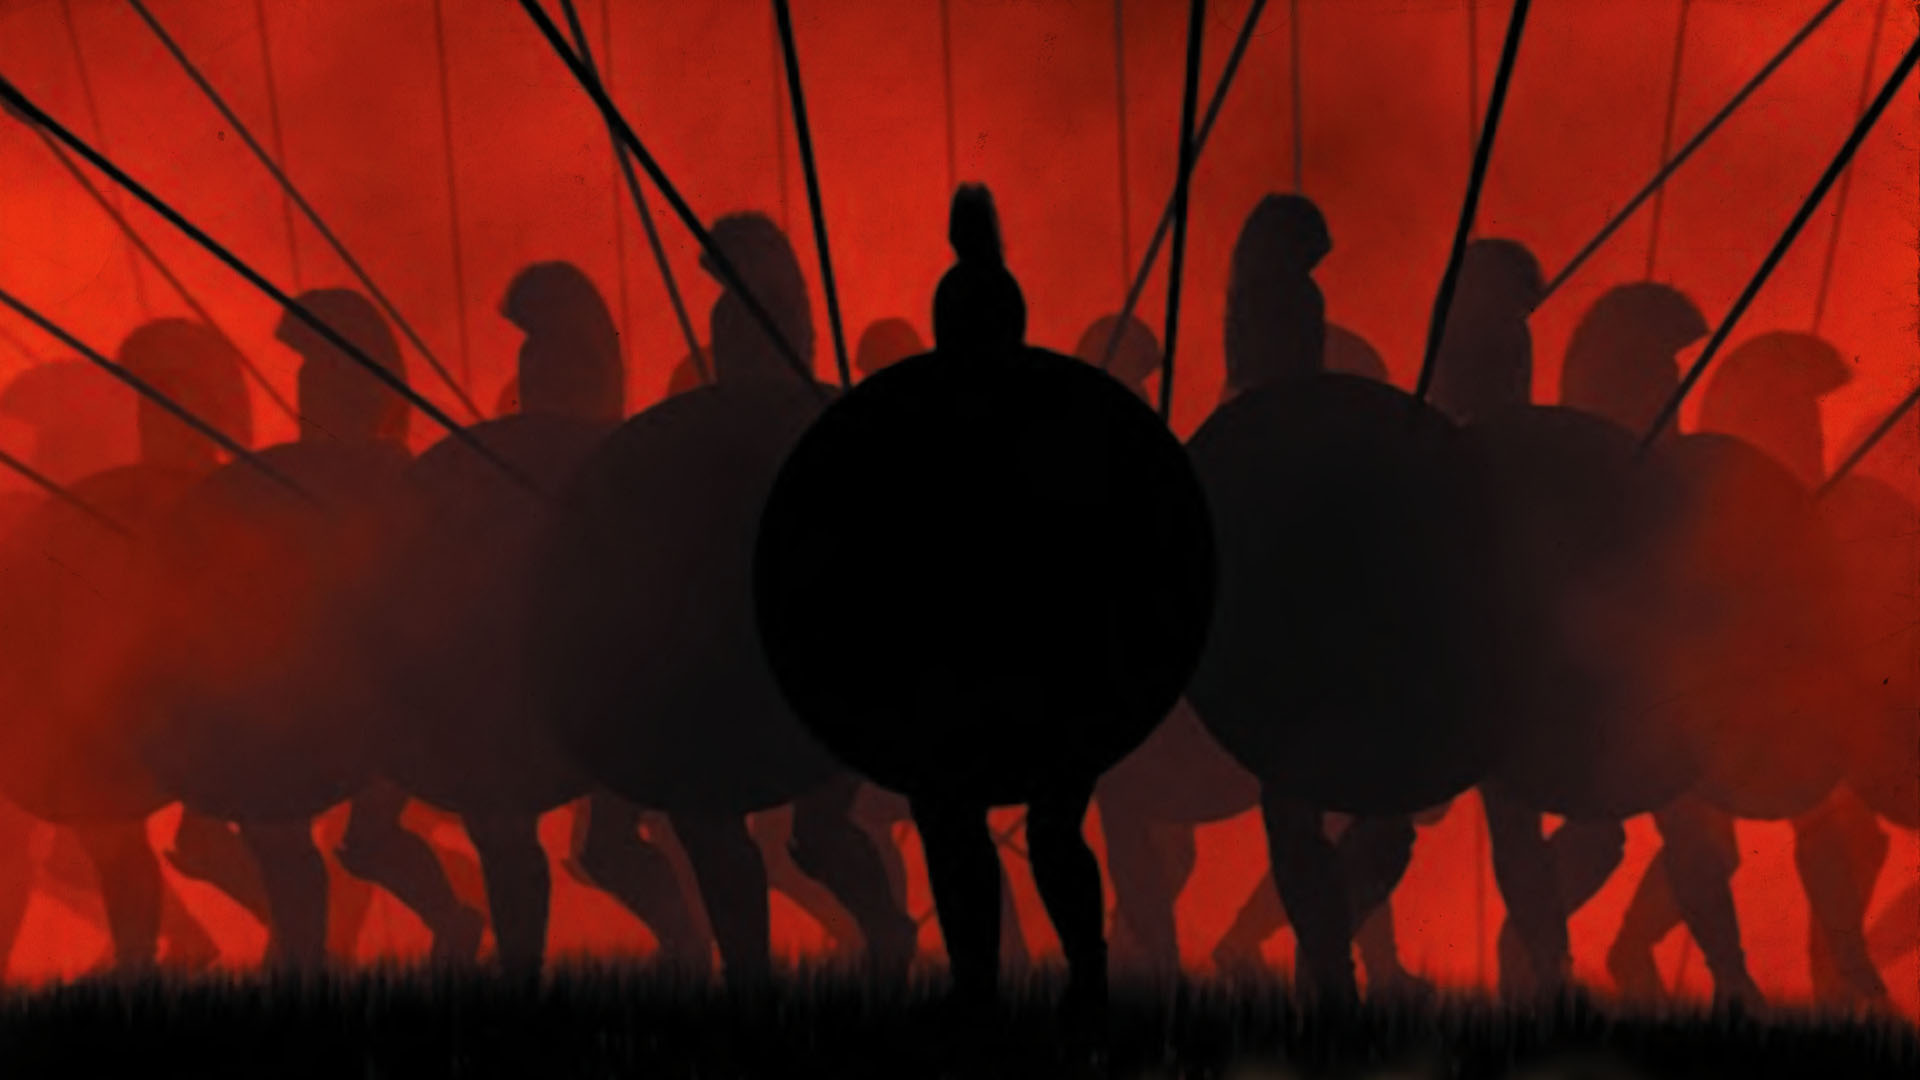 Rome Total War Wallpapers | Just Good Vibe